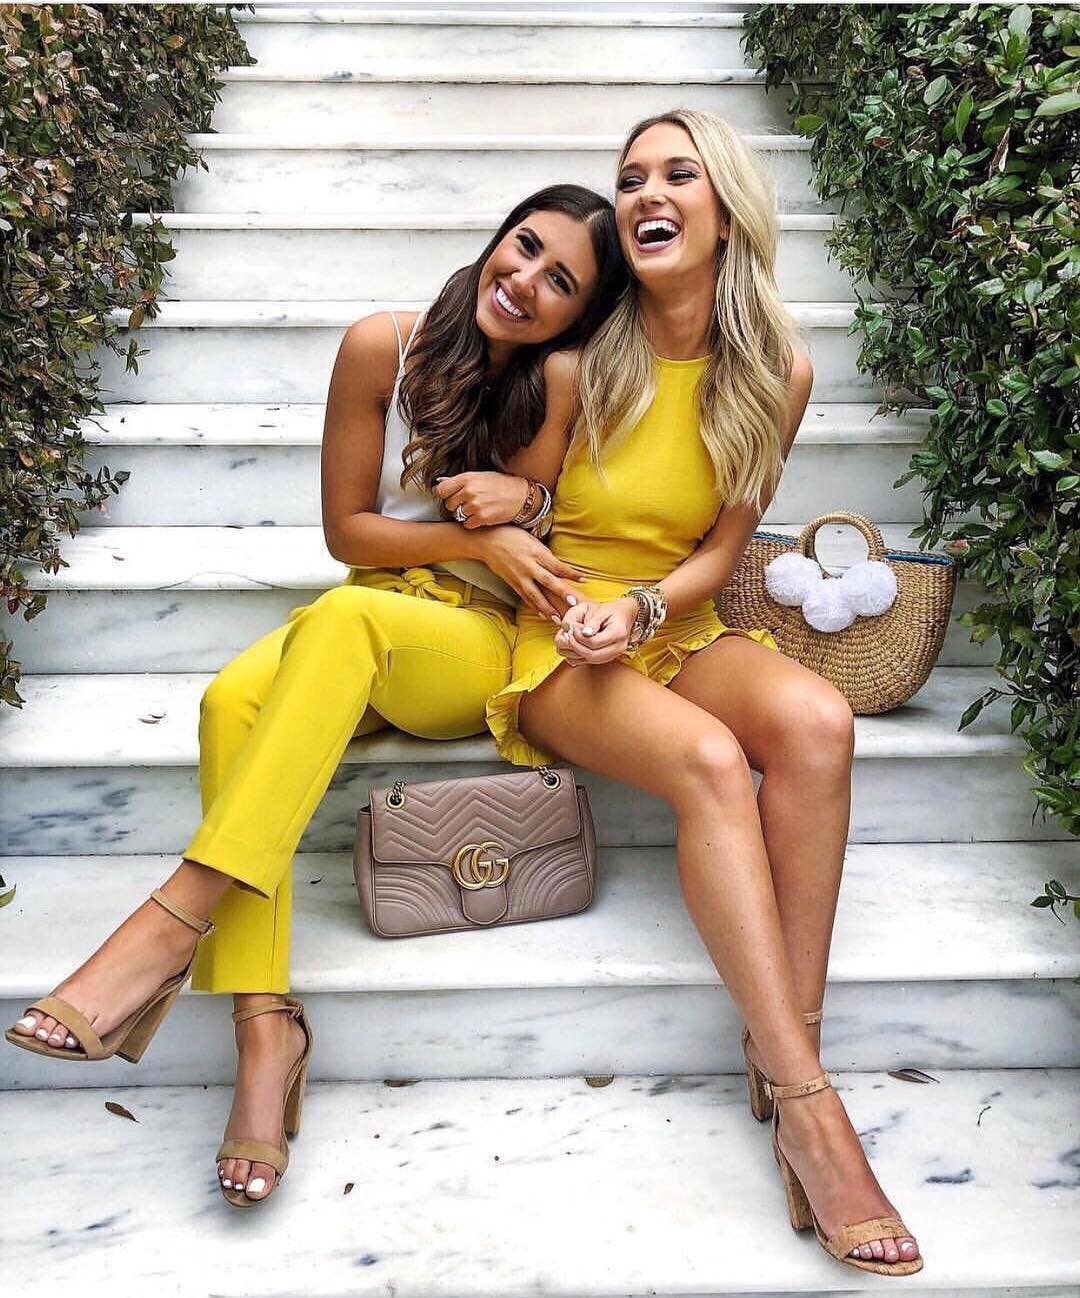 Dress Up Buttercup &amp; Champagne and Chanel looking bright in yellow - perfect for spring! 🌻☀️💐 Photo by: @stylecollective_